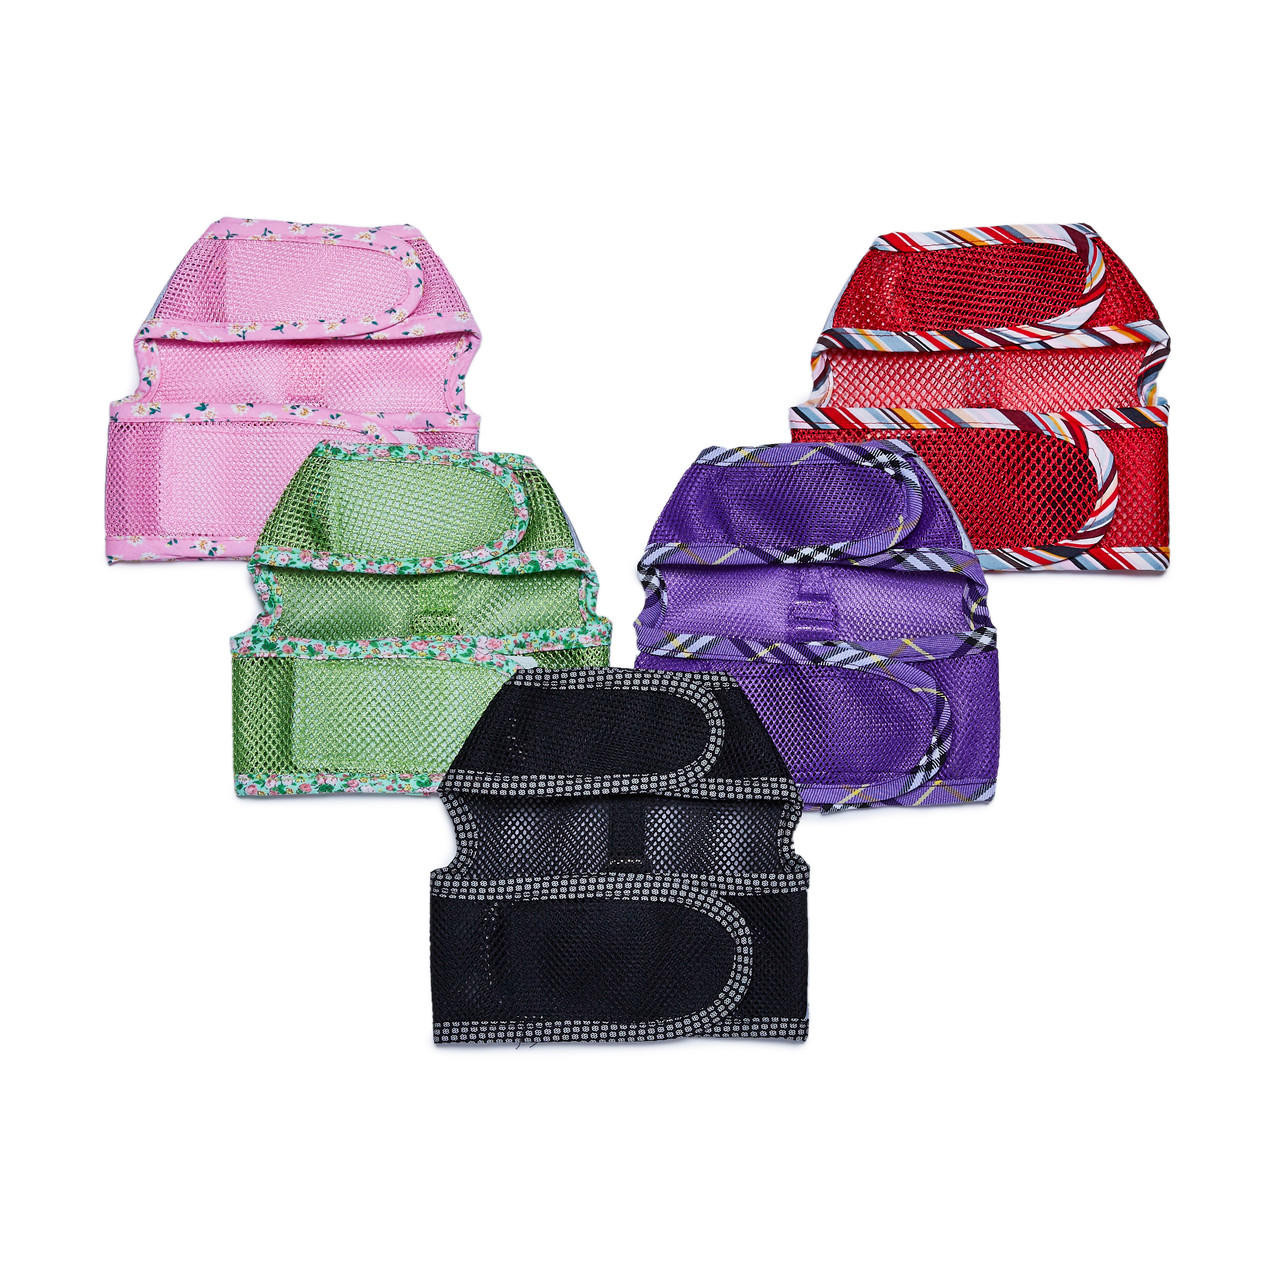  NYD Open Mesh No Buckle Wrap Harness-NEW COLORS 